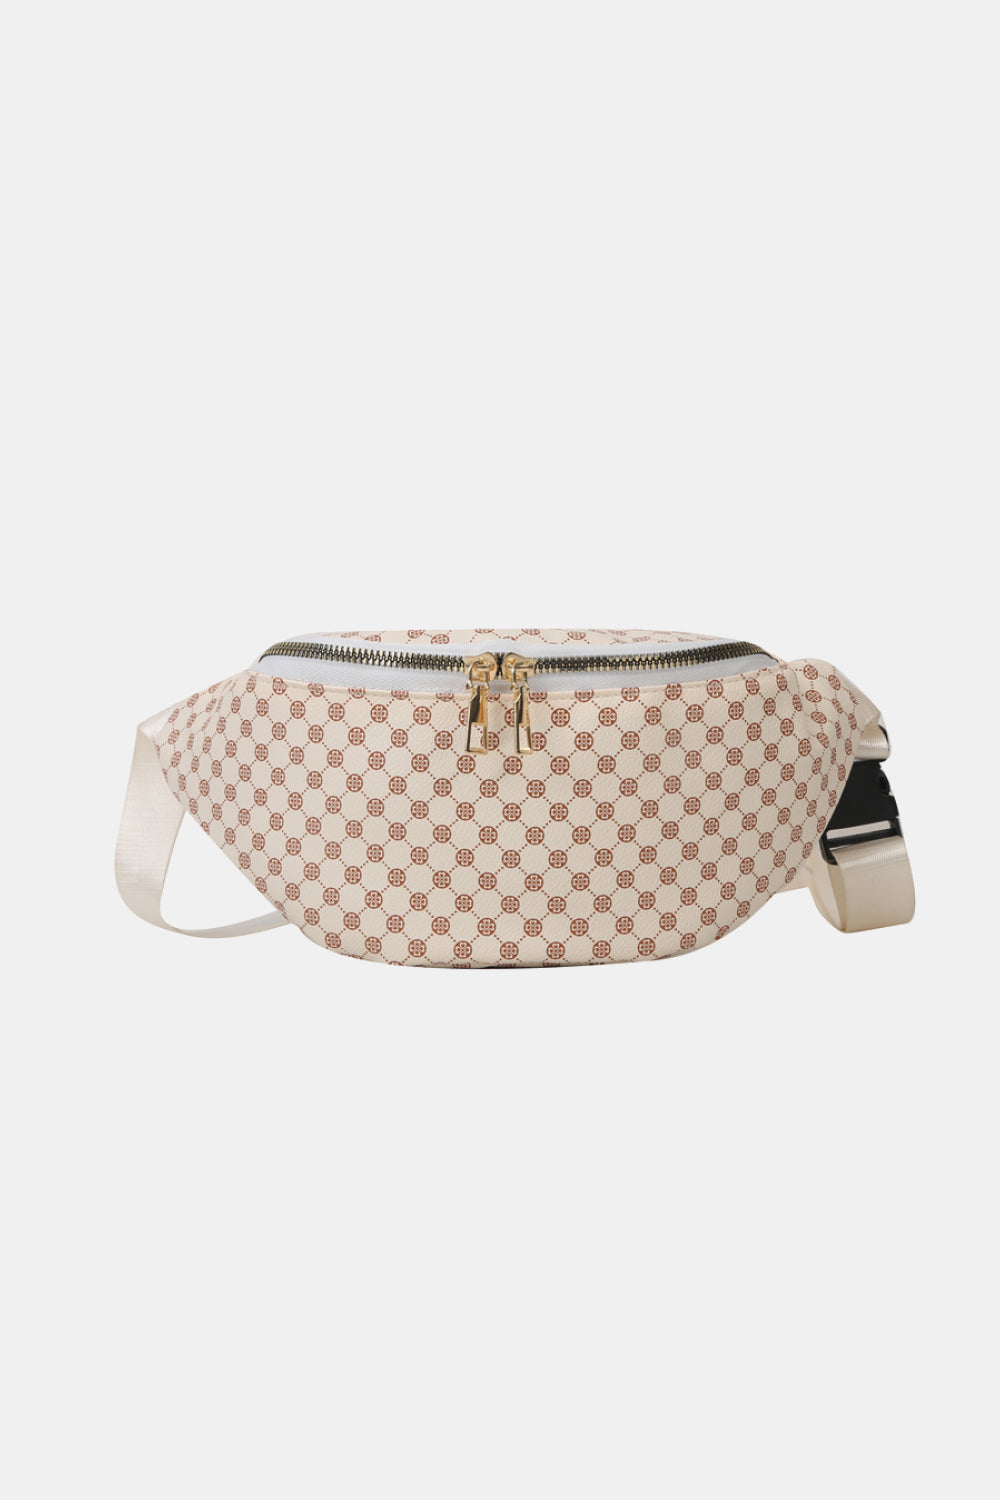 Carry it All Sling Bag - Cheeky Chic Boutique